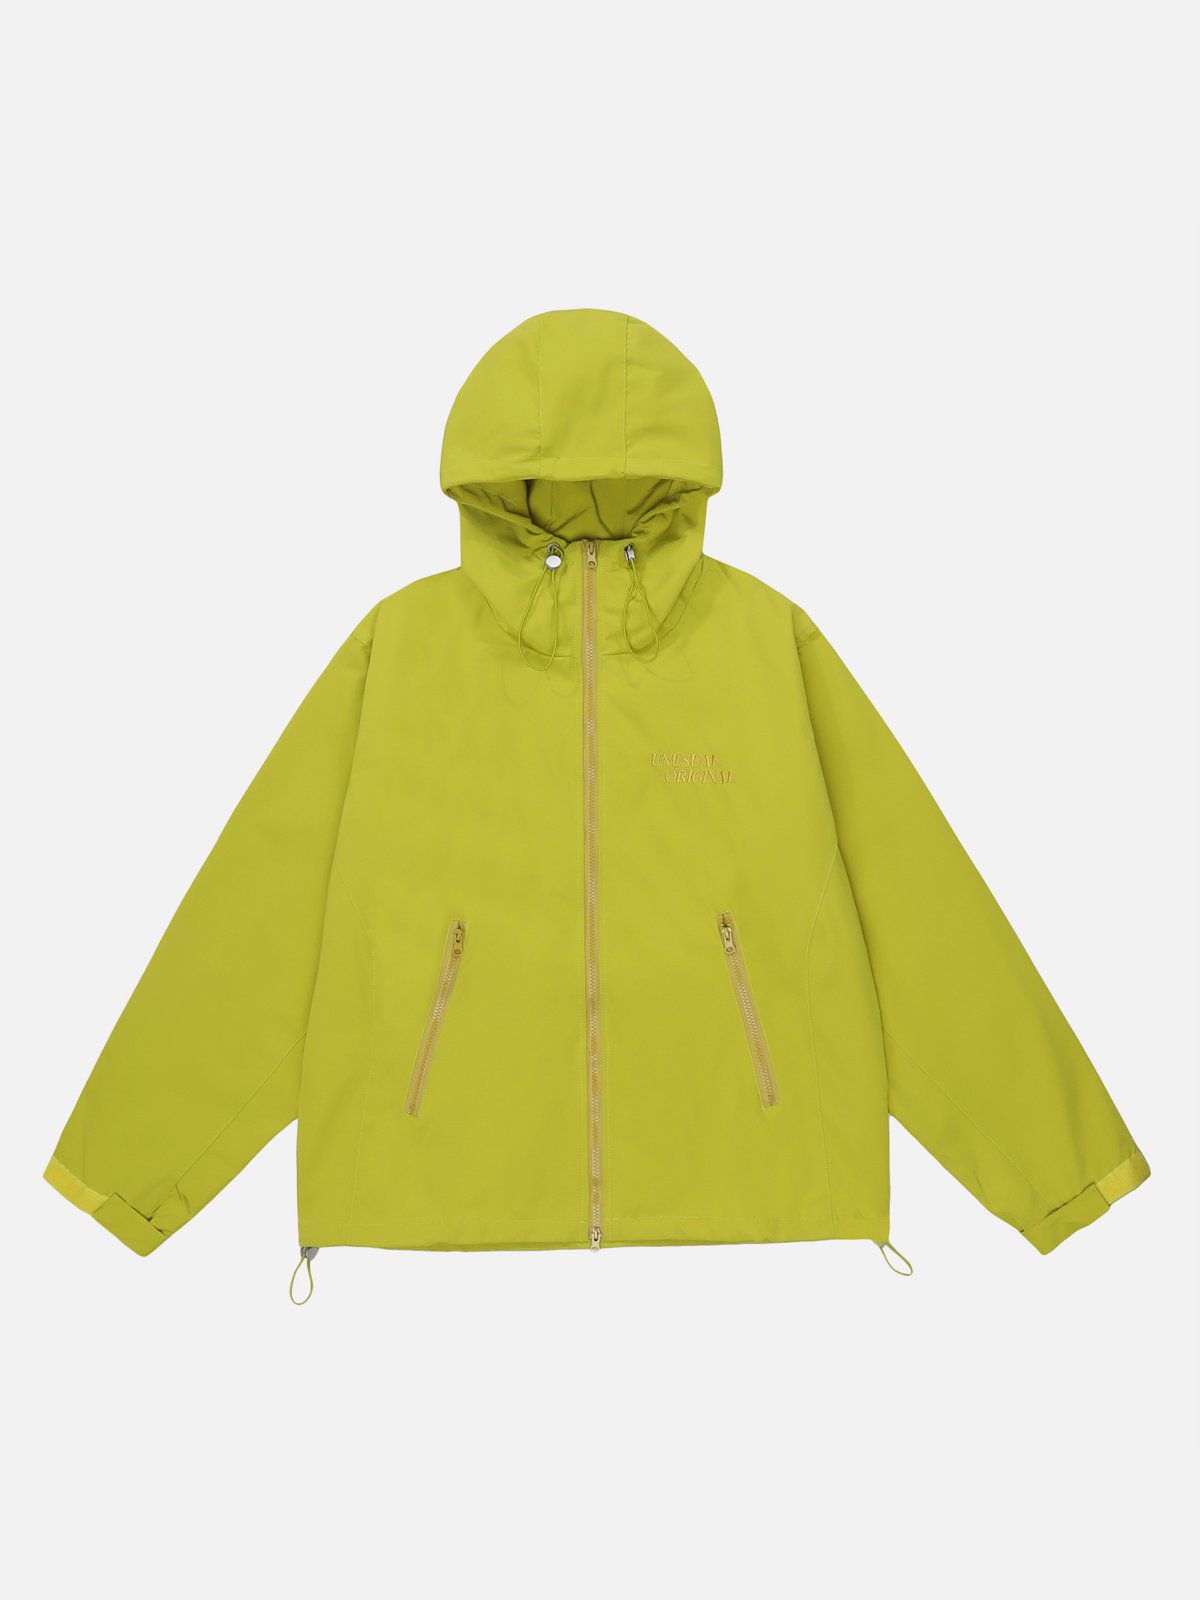 Majesda® - Solid Color Thickend Anorak outfit ideas, streetwear fashion - majesda.com